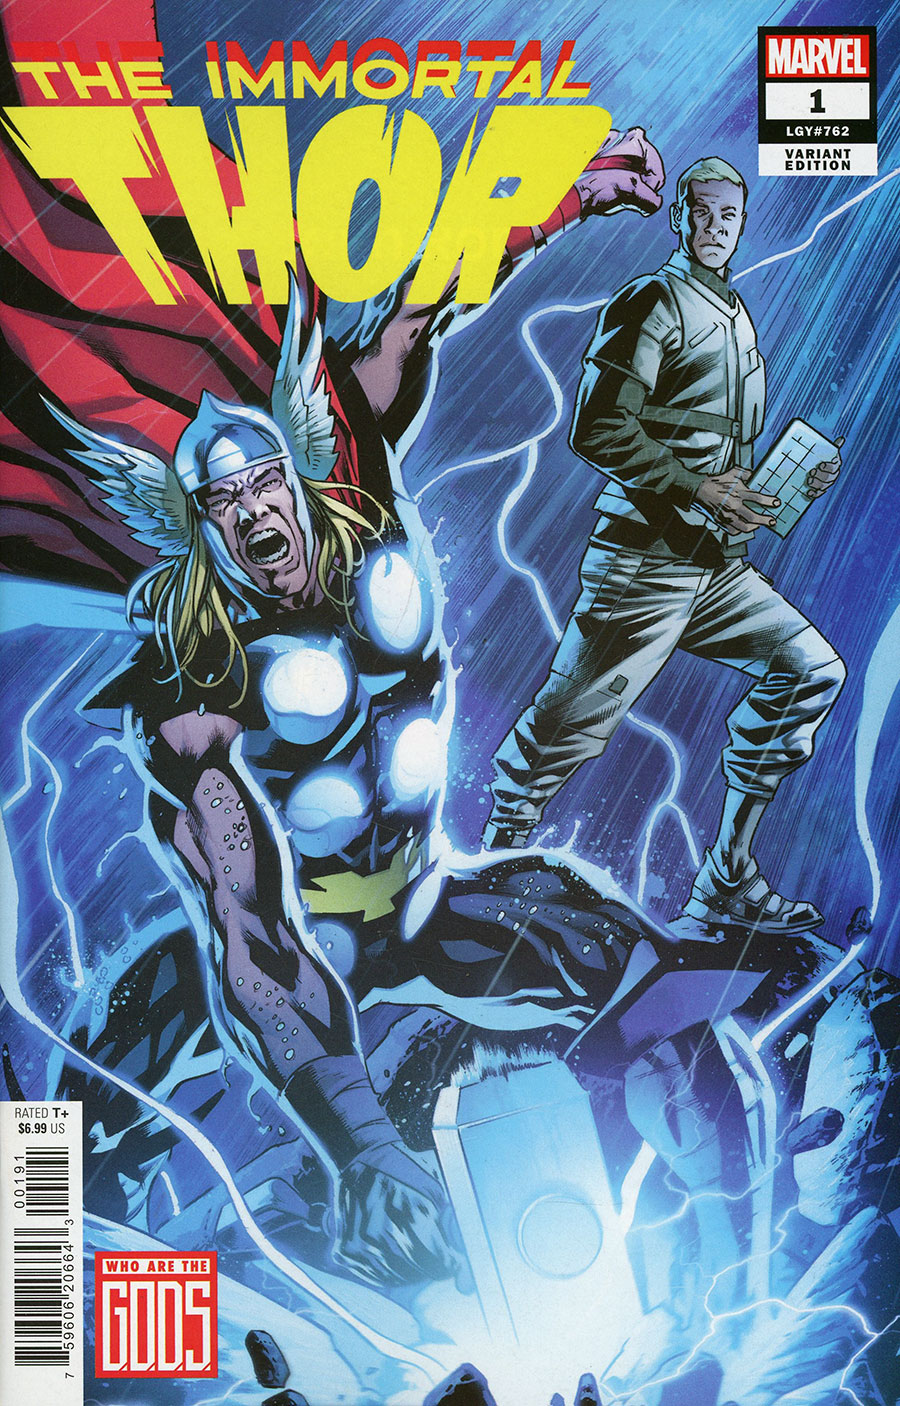 Immortal Thor #1 Cover C Variant Bryan Hitch G.O.D.S. Cover (G.O.D.S. Tie-In)